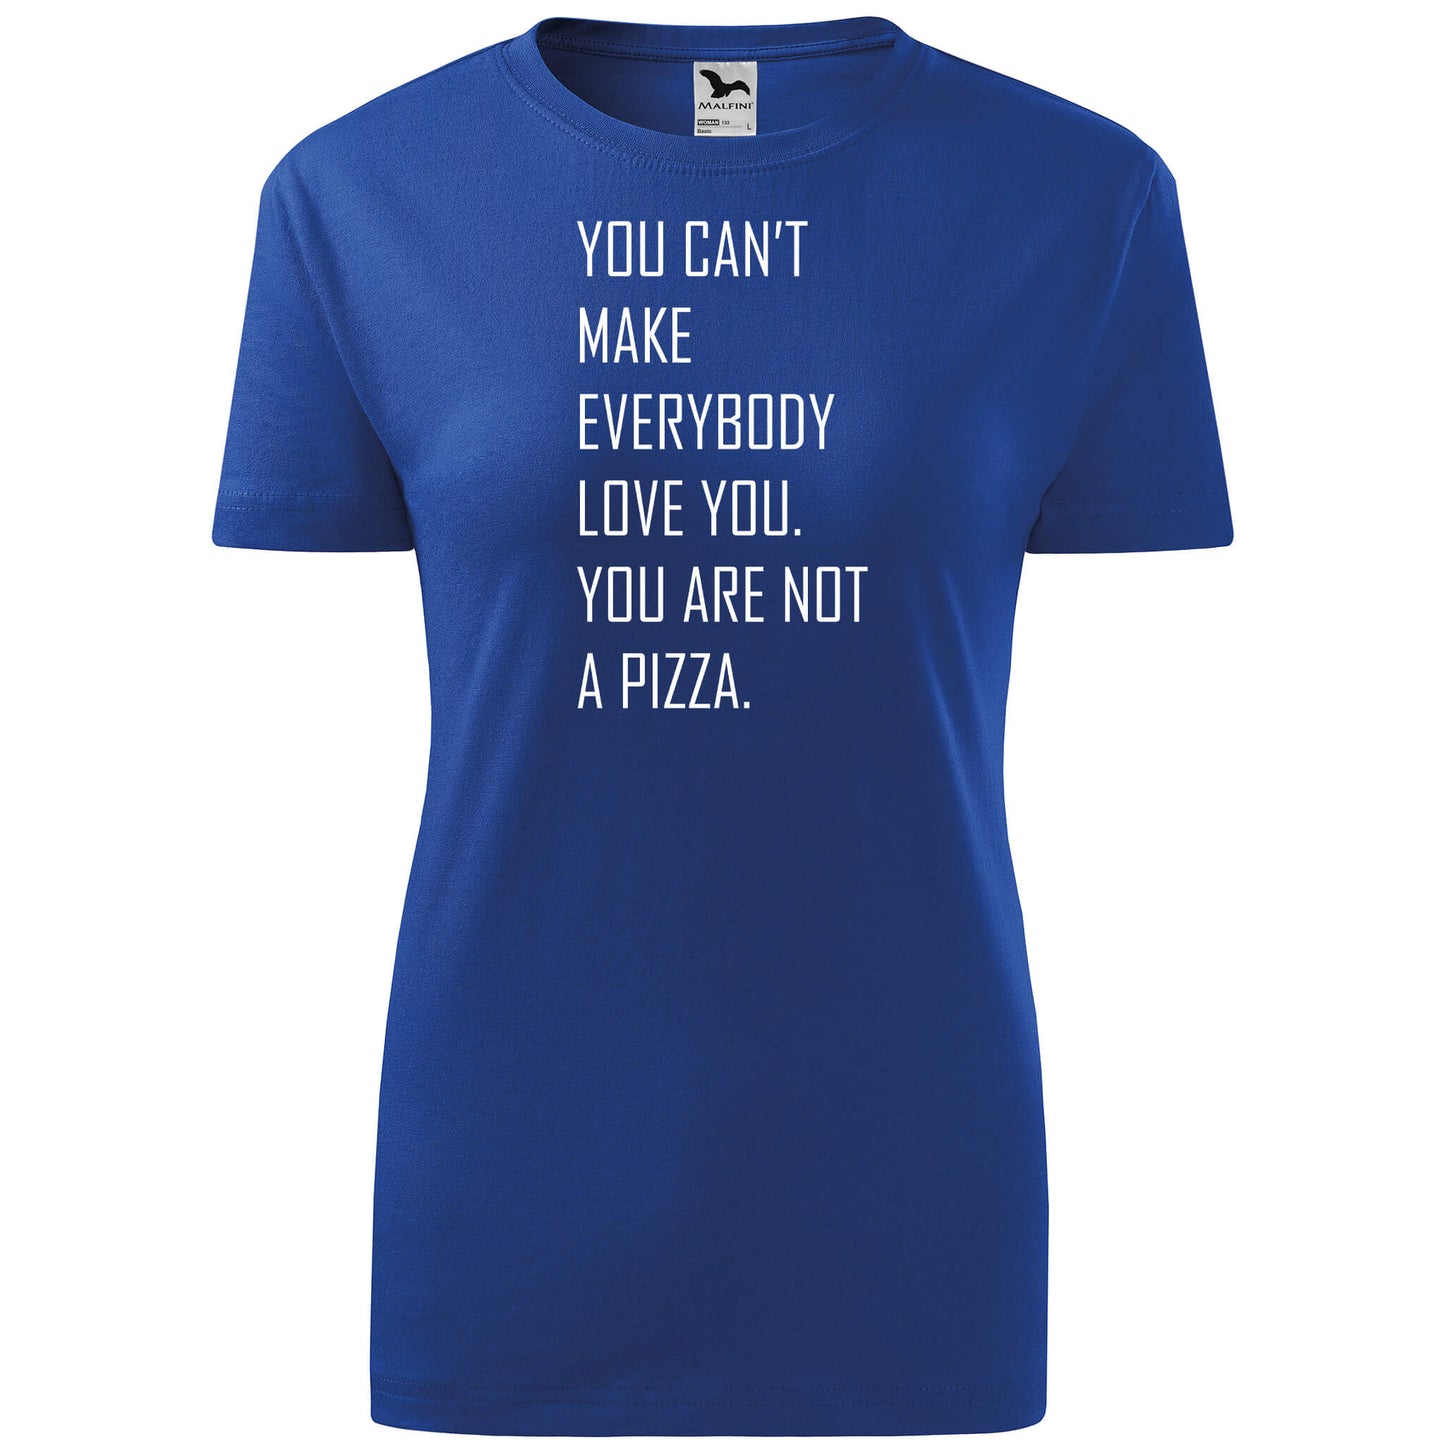 T-shirt - You can't make everybody love you, you are not a pizza - rvdesignprint